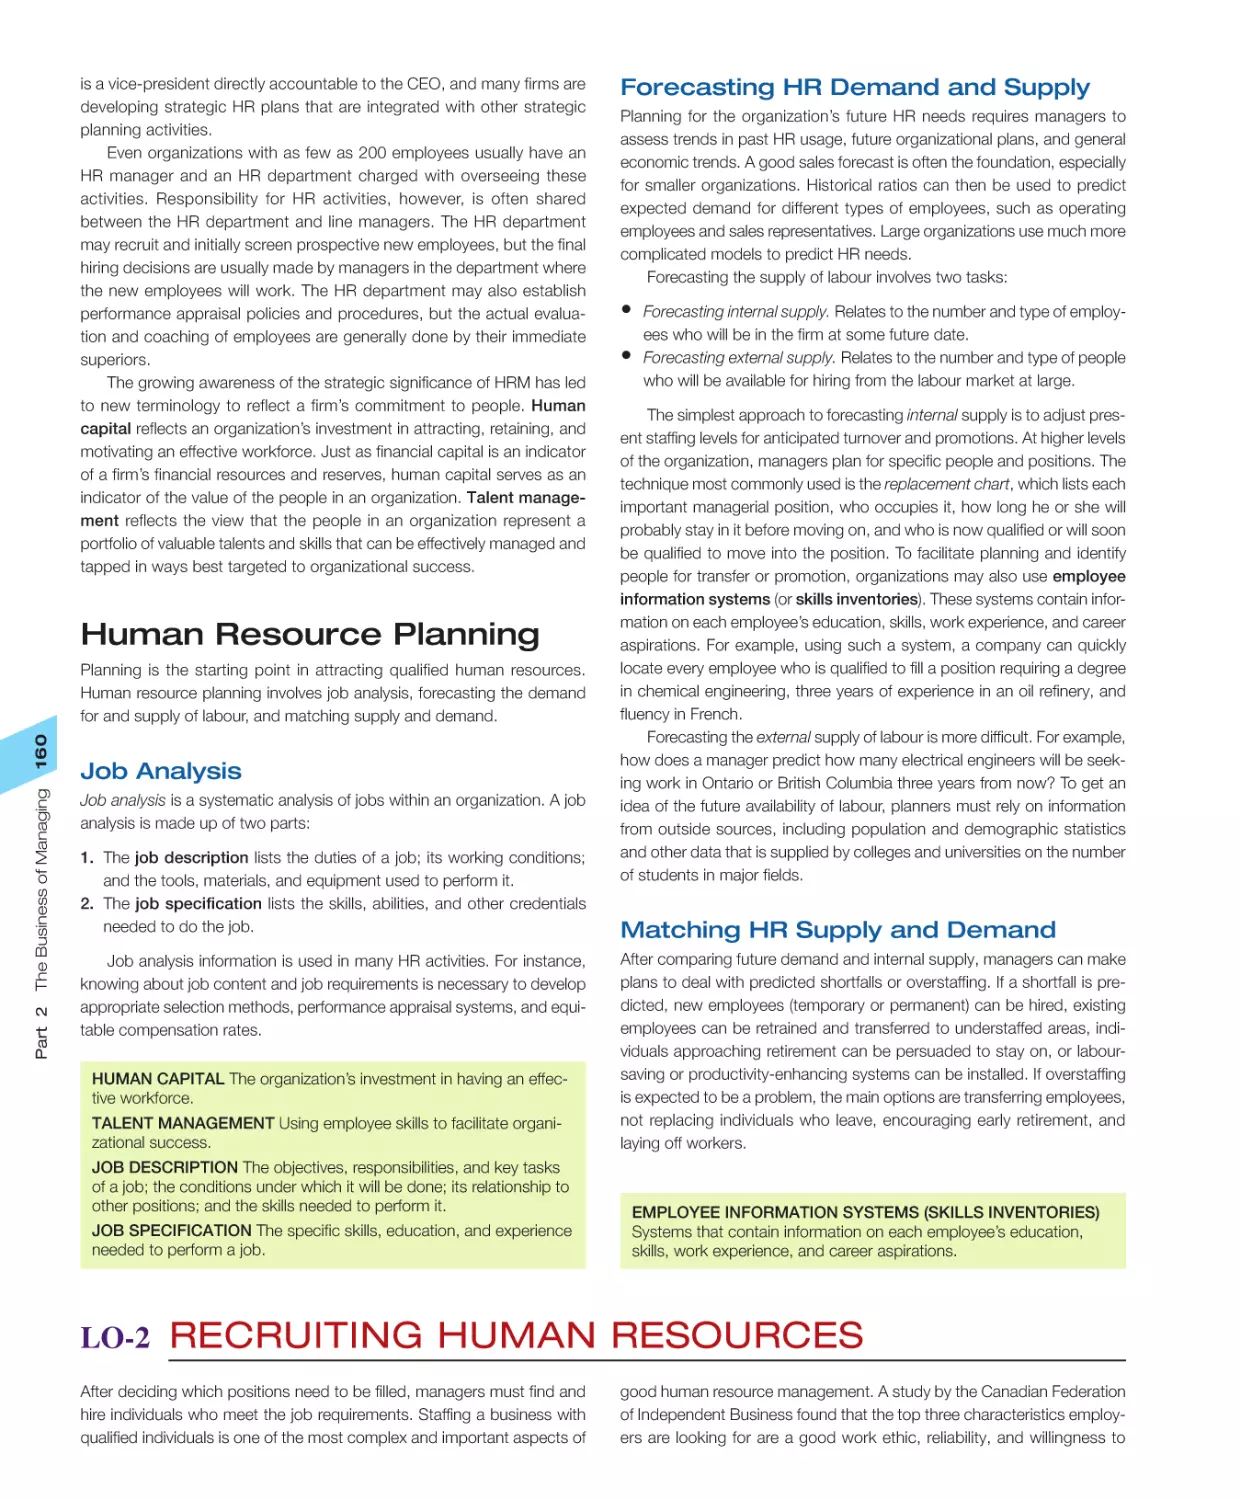 Human Resource Planning
LO‐2 Recruiting Human Resources